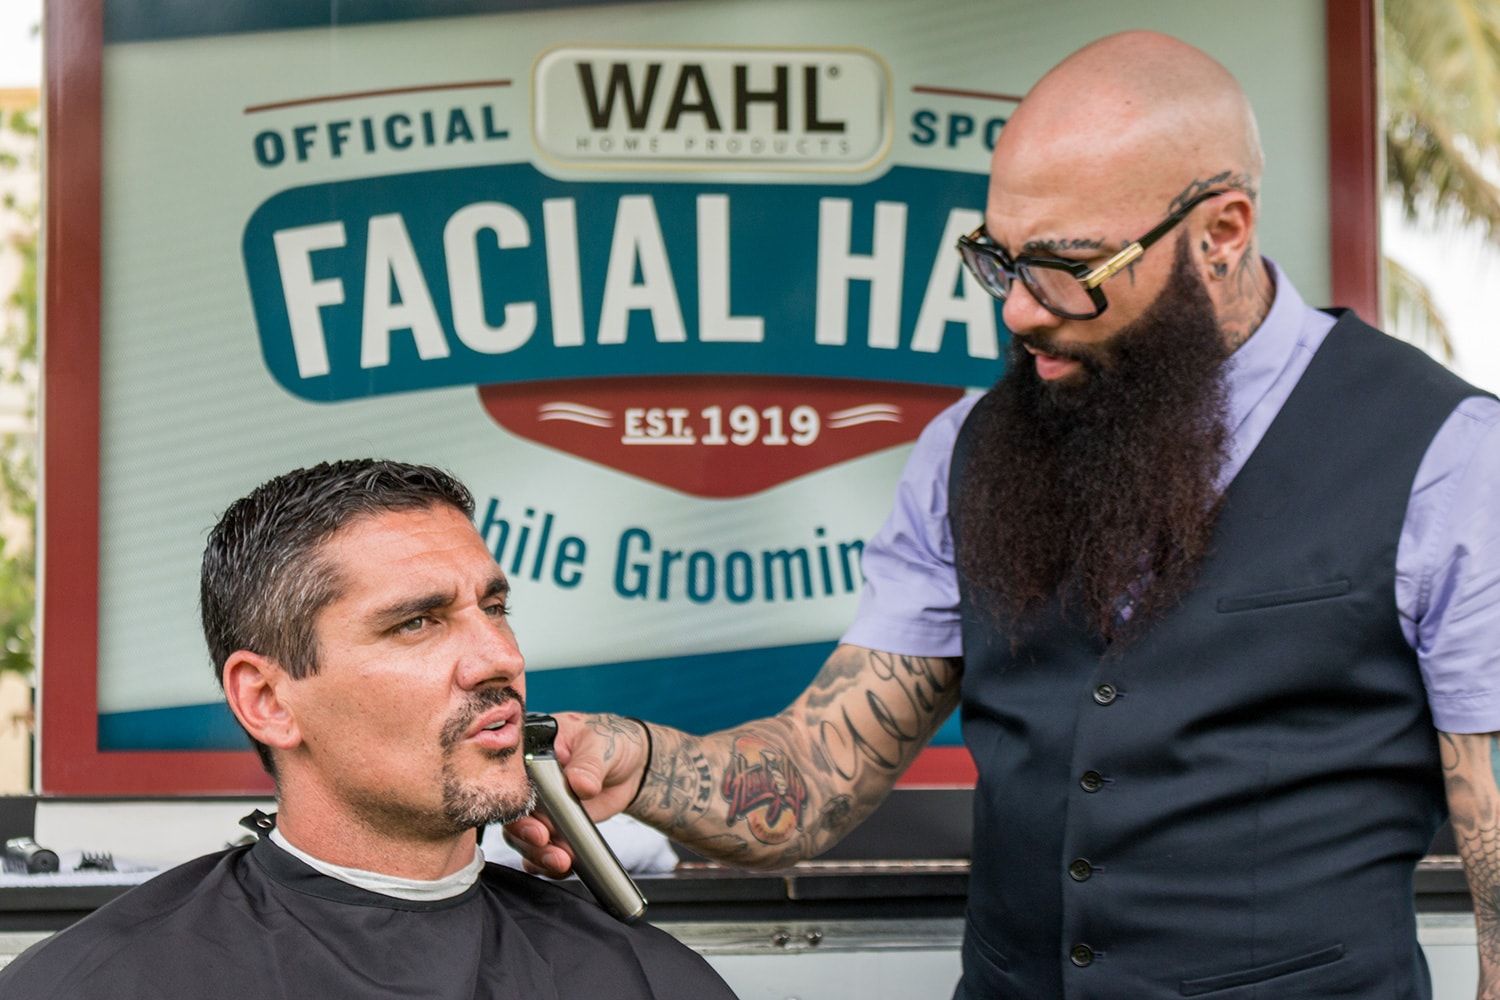 Article Image - Wahl’s Mobile Grooming Tour